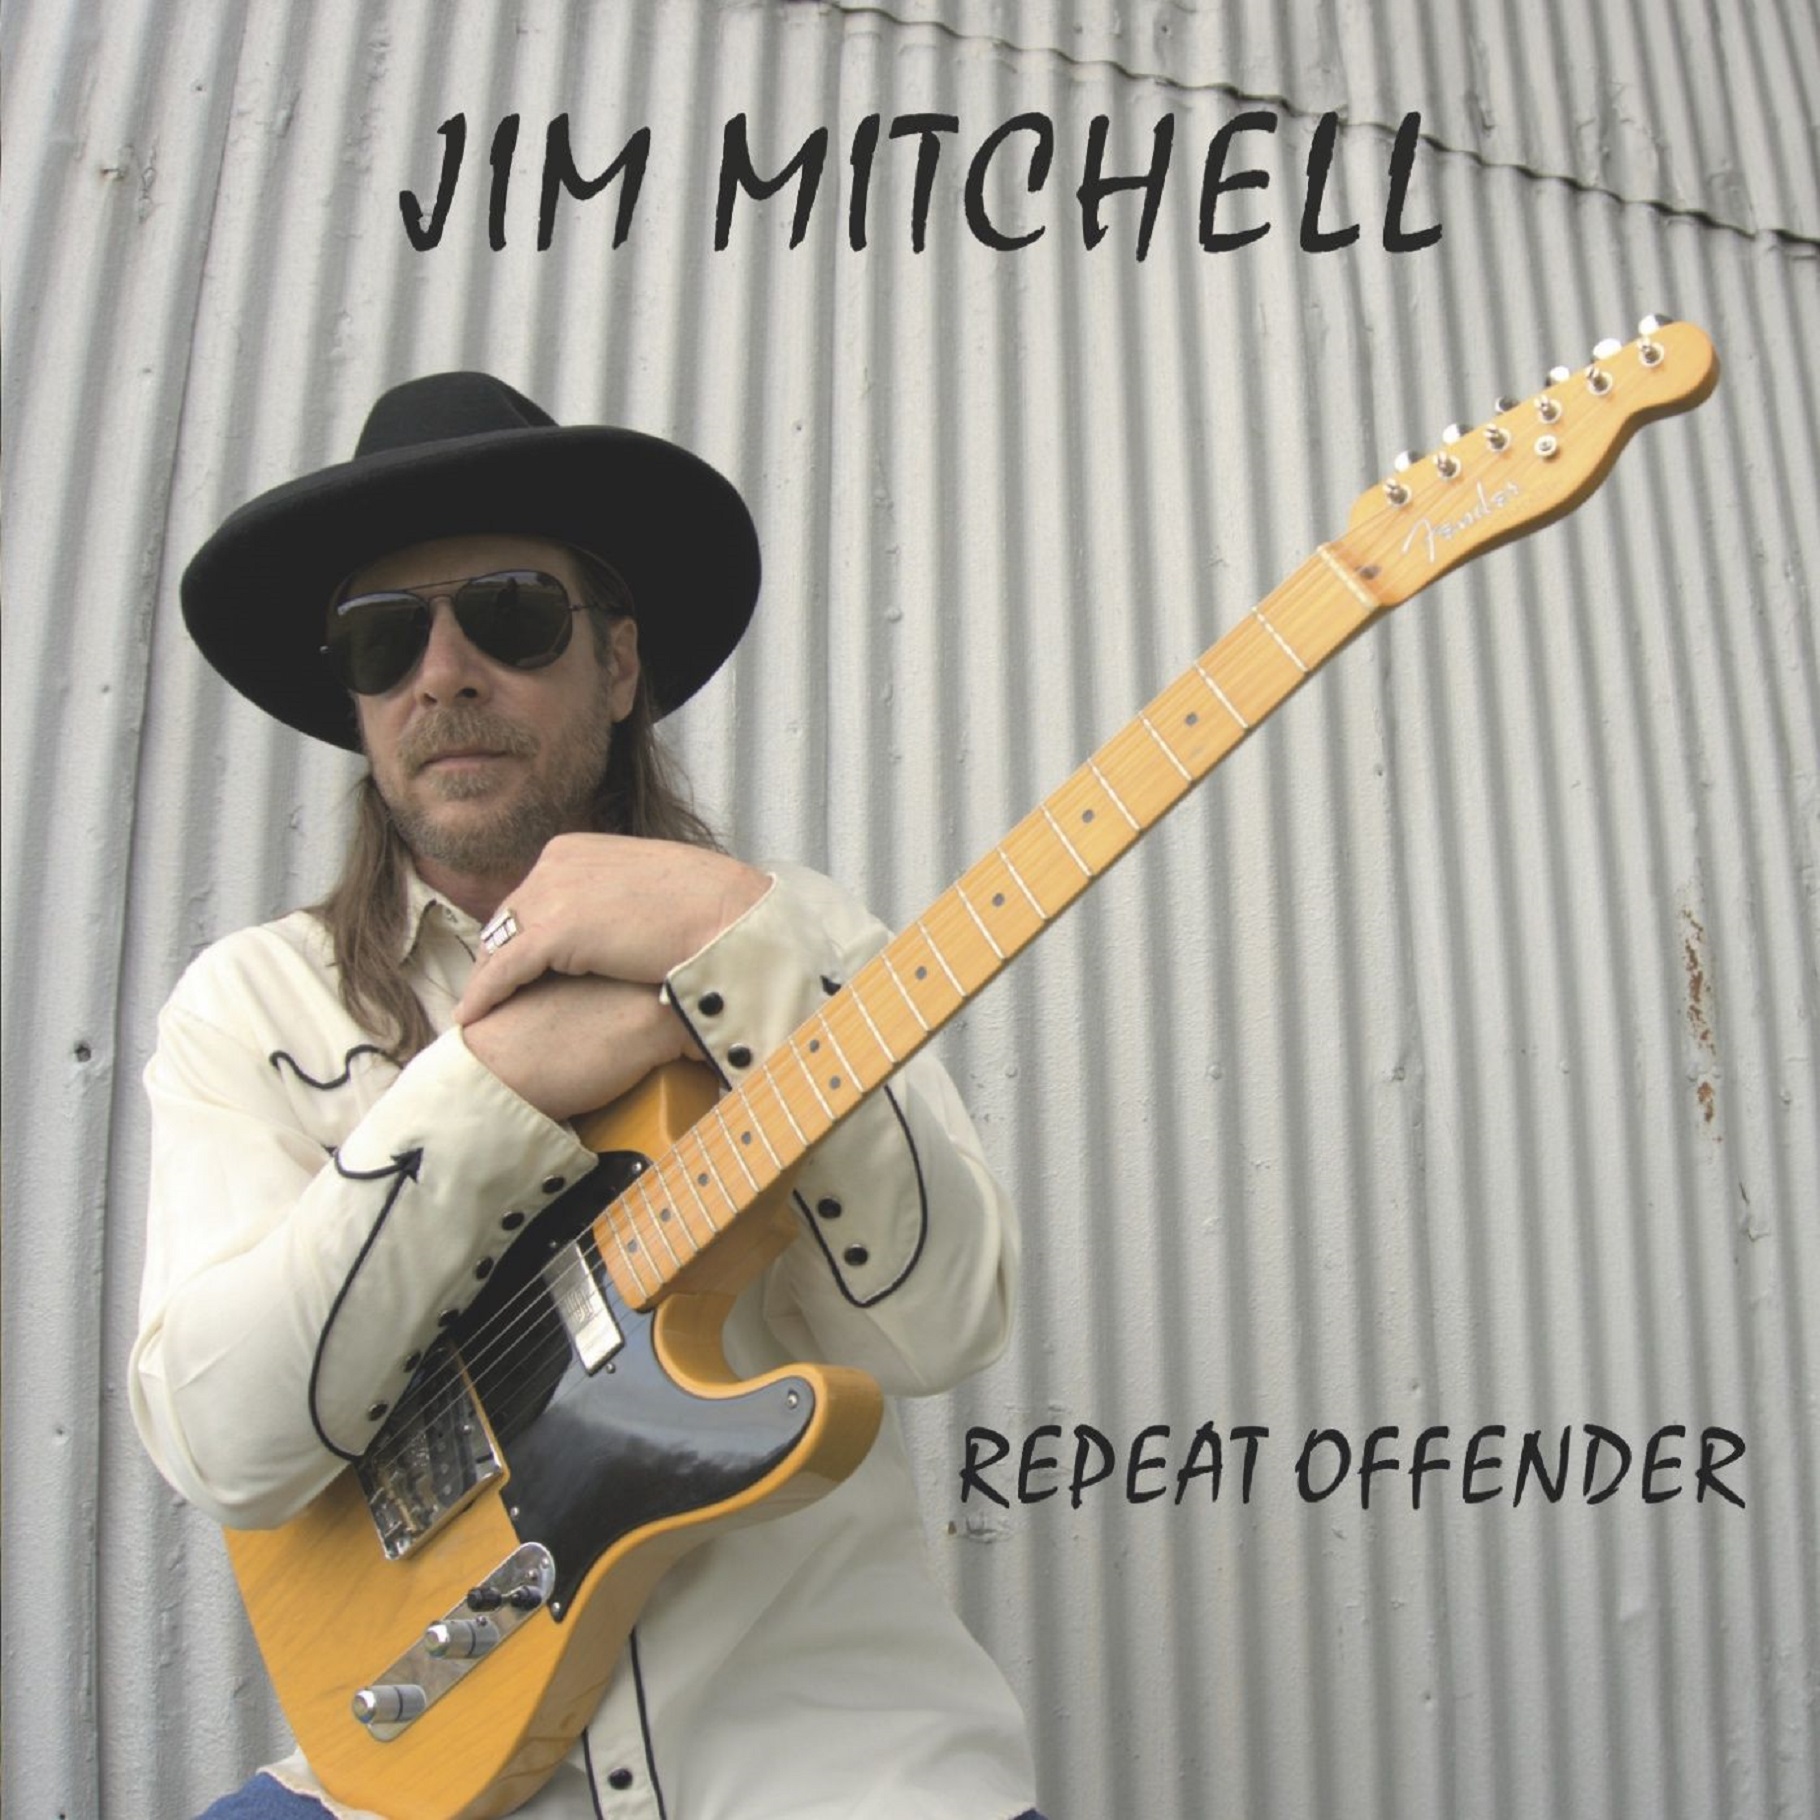 Jim Mitchell's 'Repeat Offender': An Autobiographical Journey Through Song